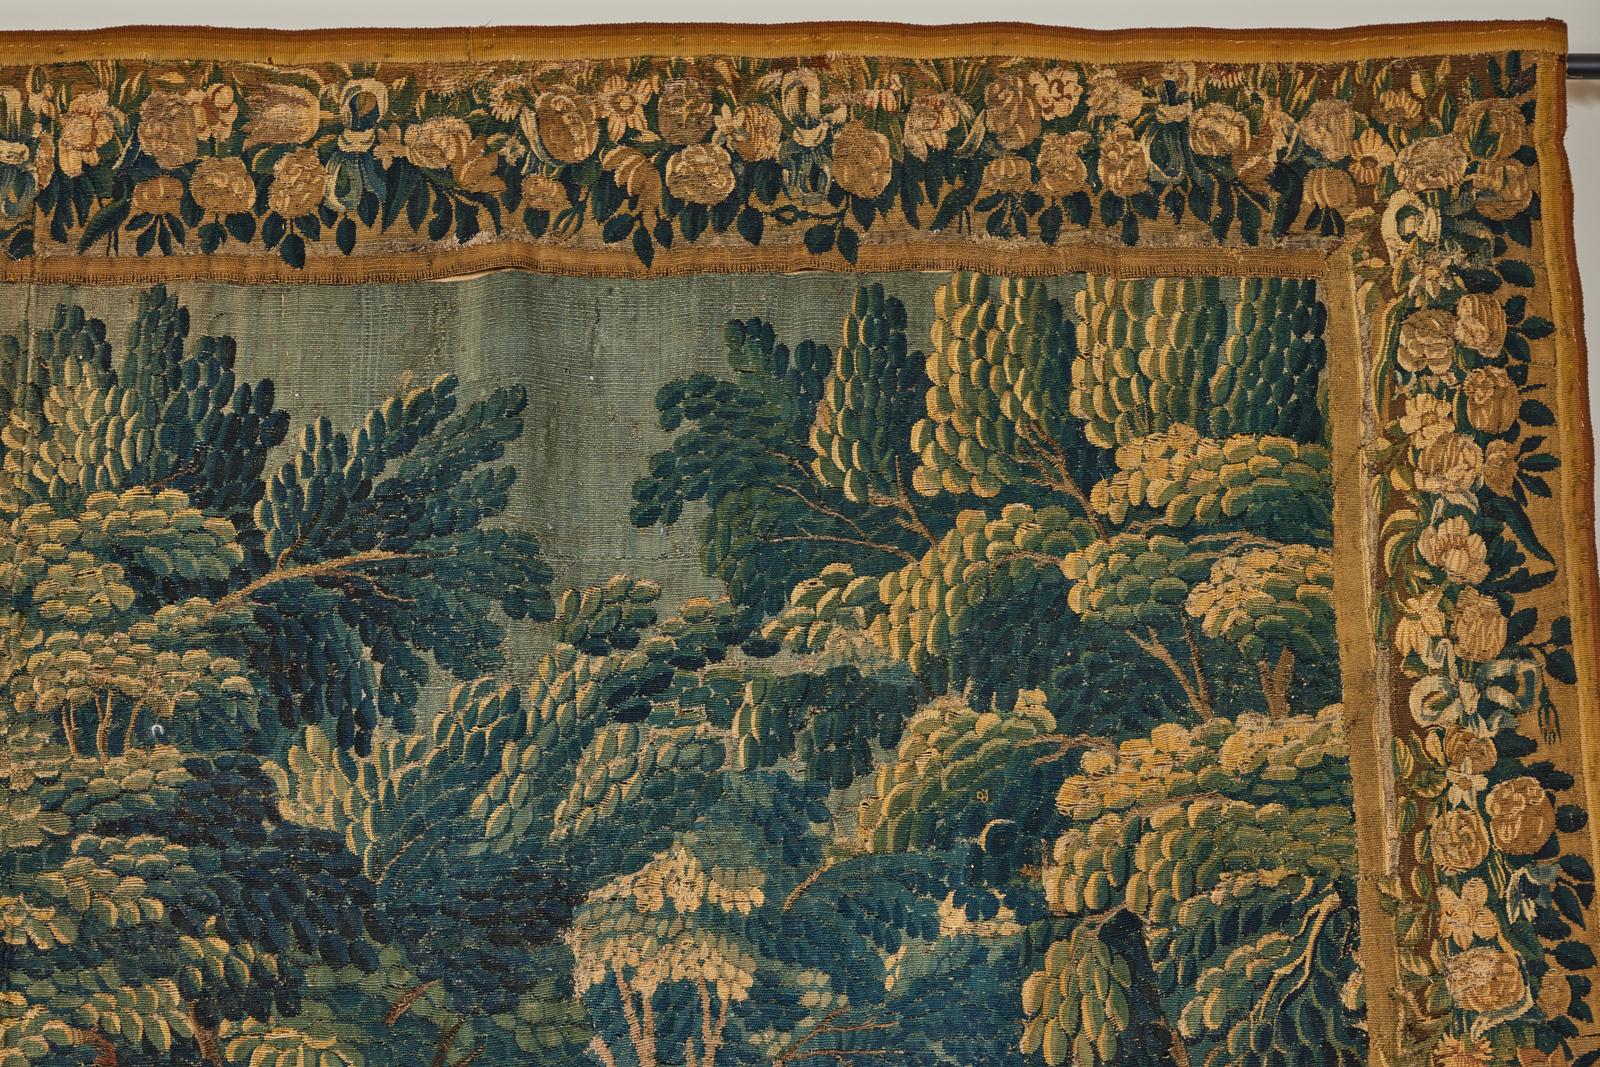 Woven A Late 17th Century Flemish Verdure Tapestry